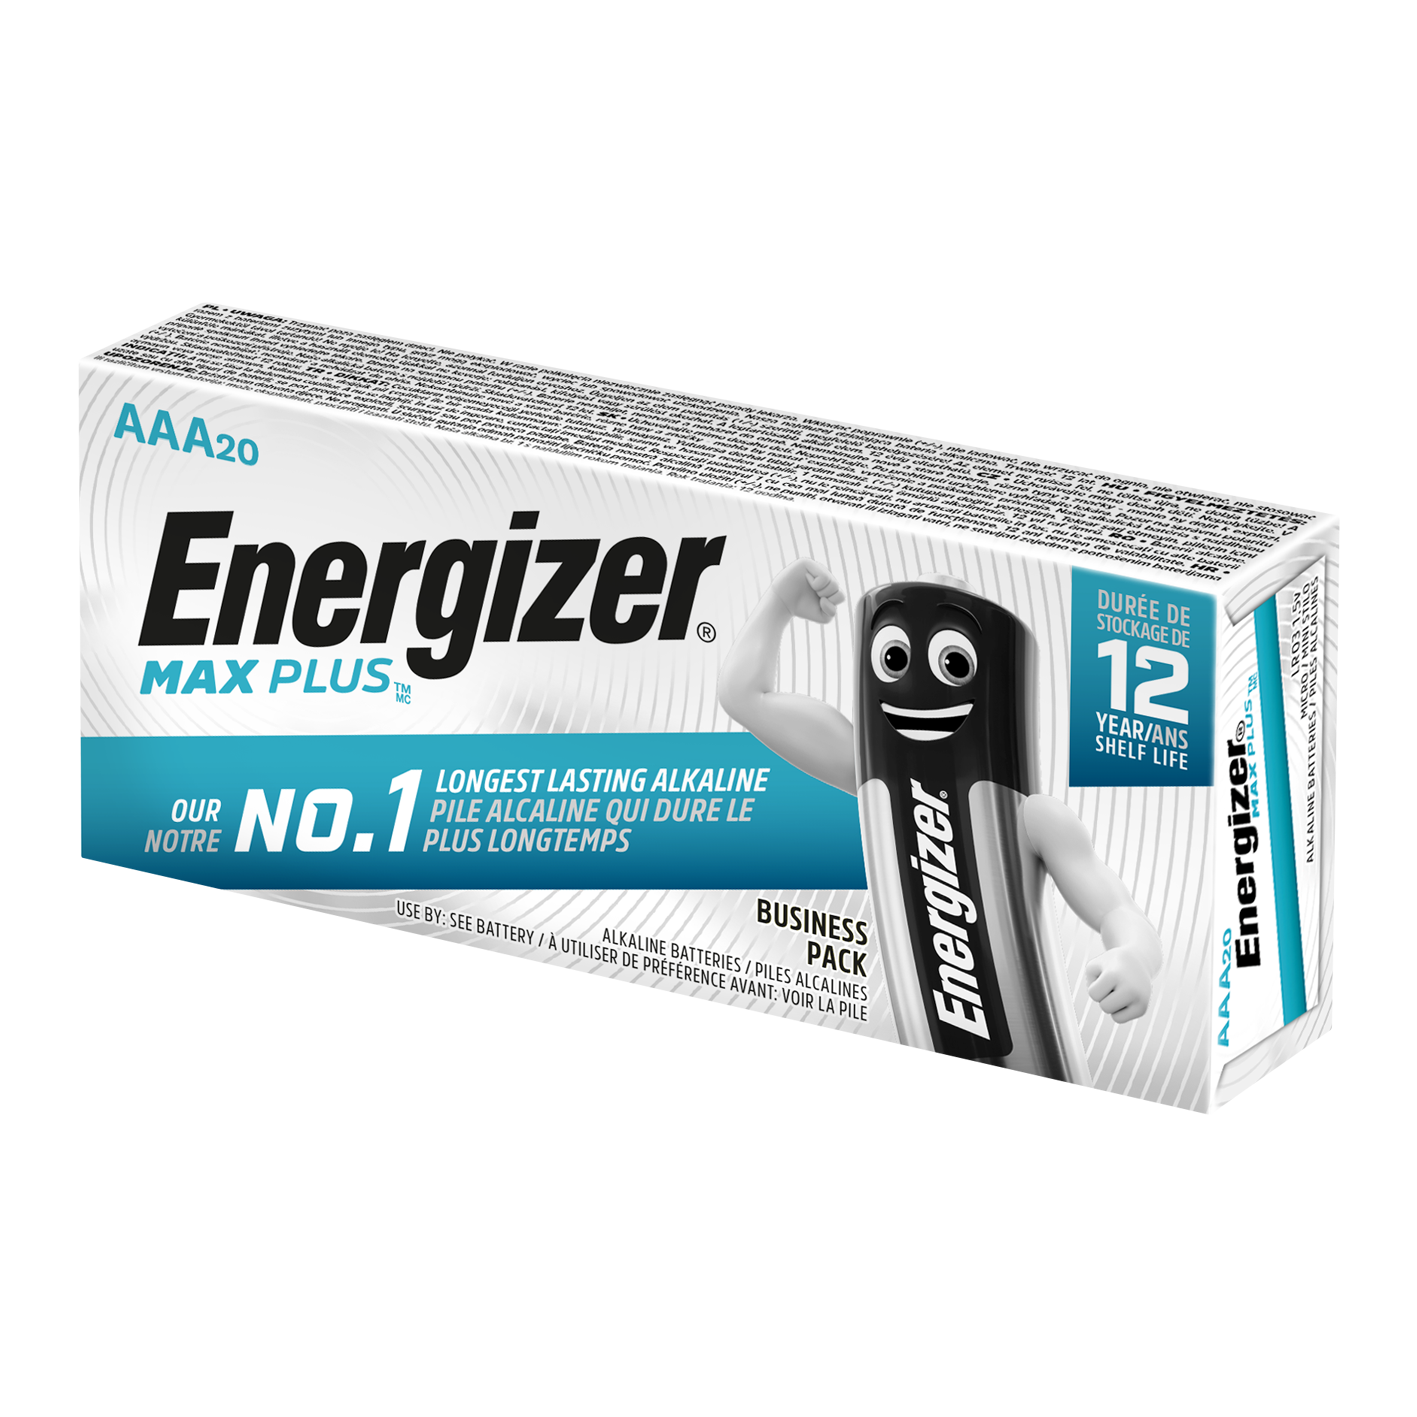 Energizer® AAA Max Plus Alkaline, 20er-Packung – Business-Packung